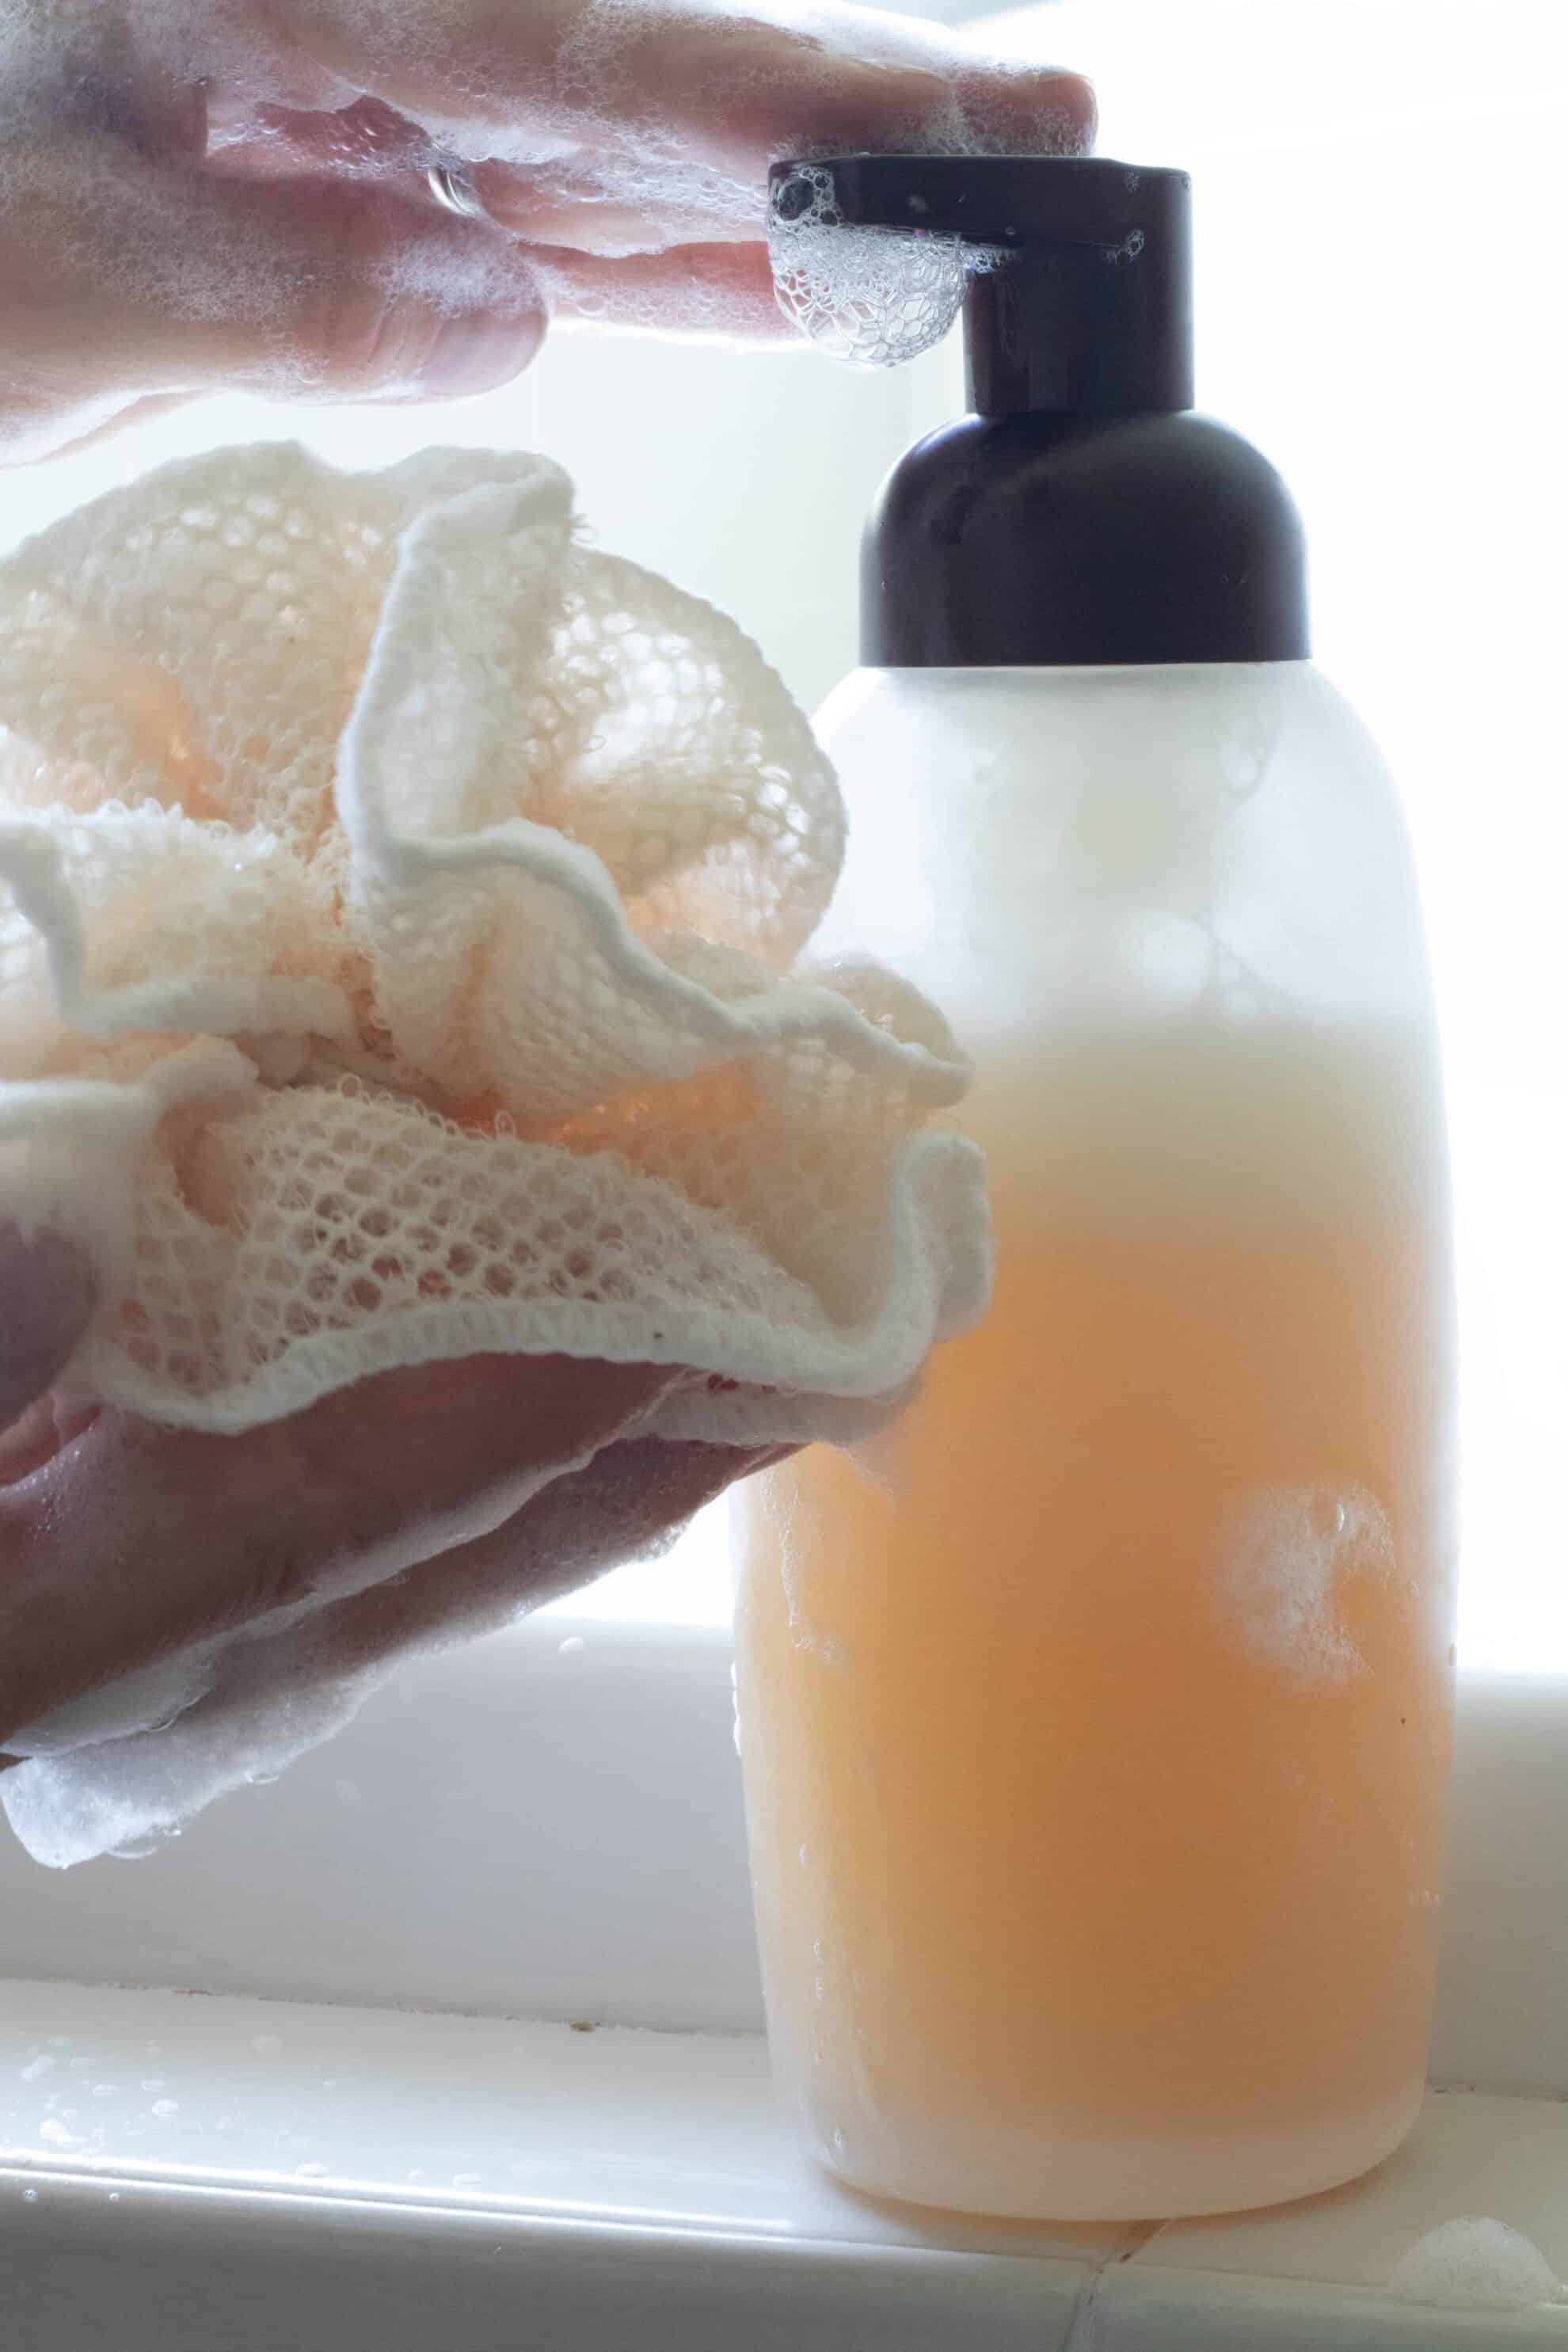 Foaming body wash with shower scrubber.